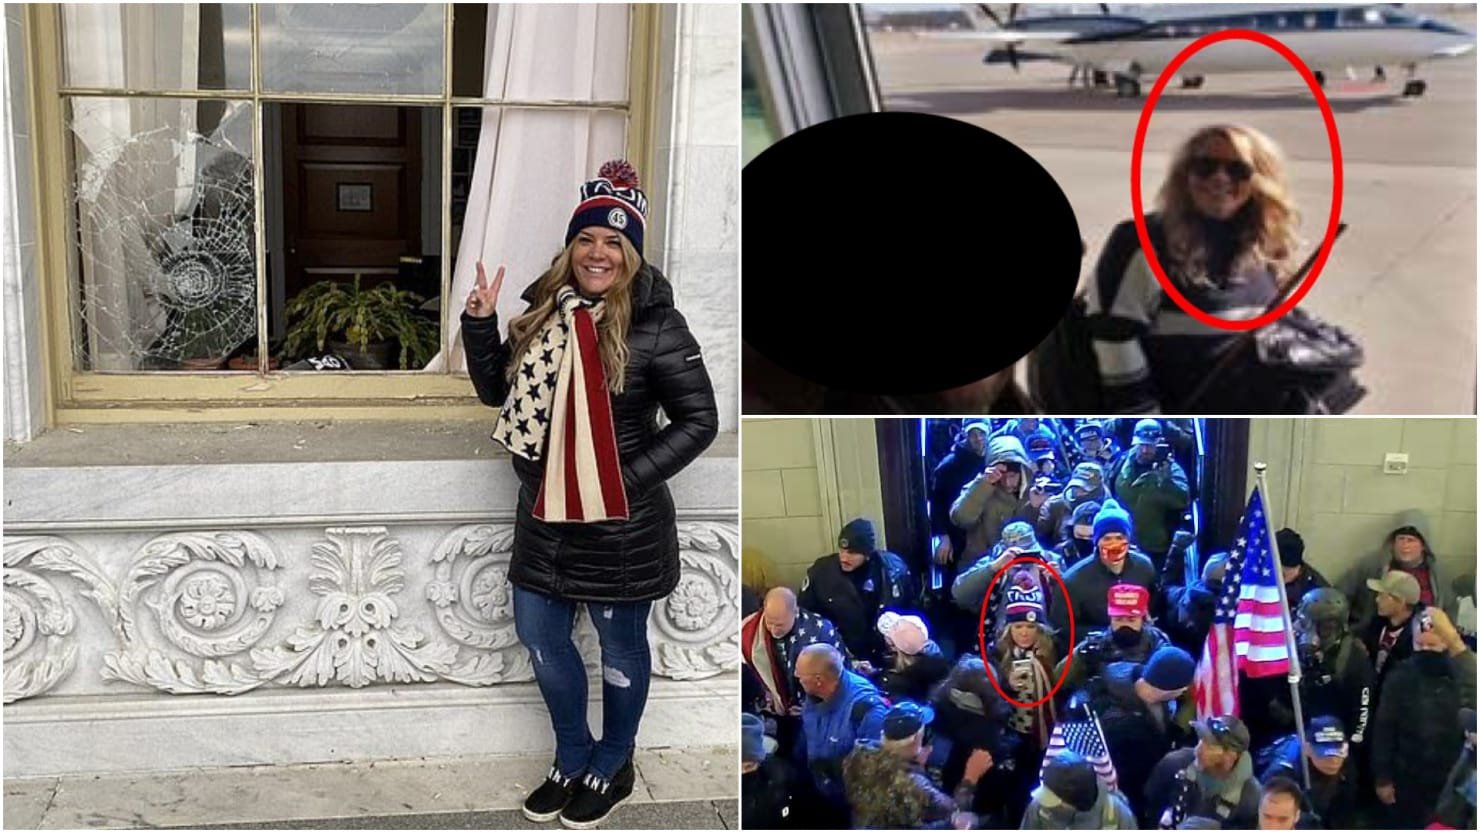 Jenna Ryan, Texas Real Estate Agent Who Took Private Jet to Capitol Riot, Is Arrested